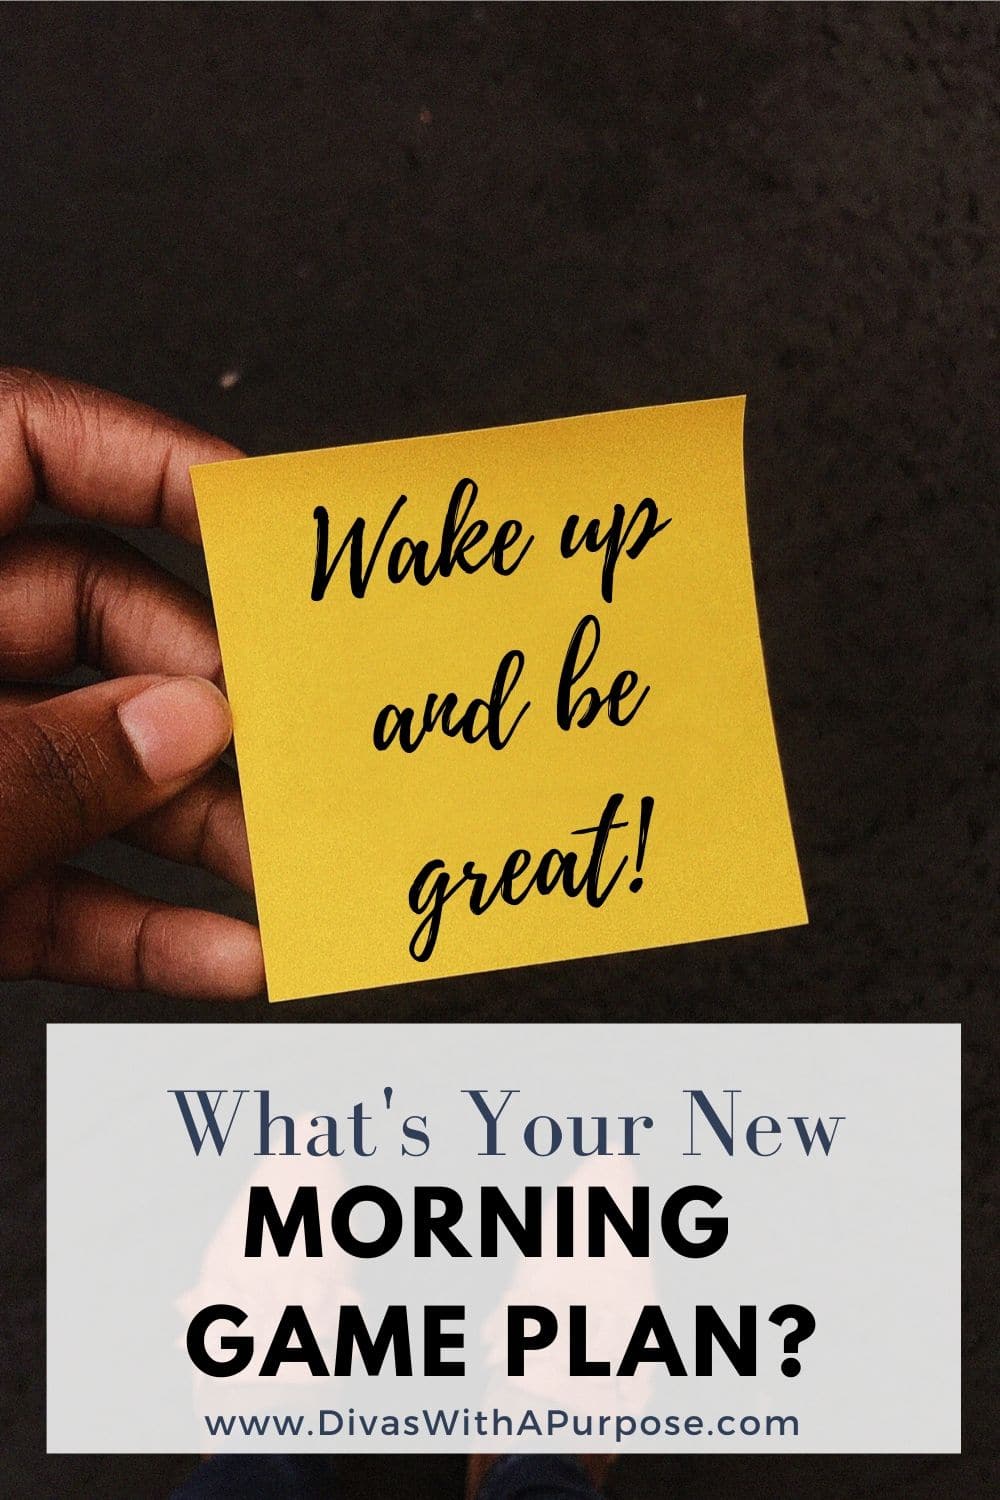 What is your morning game plan that will set you up for success?